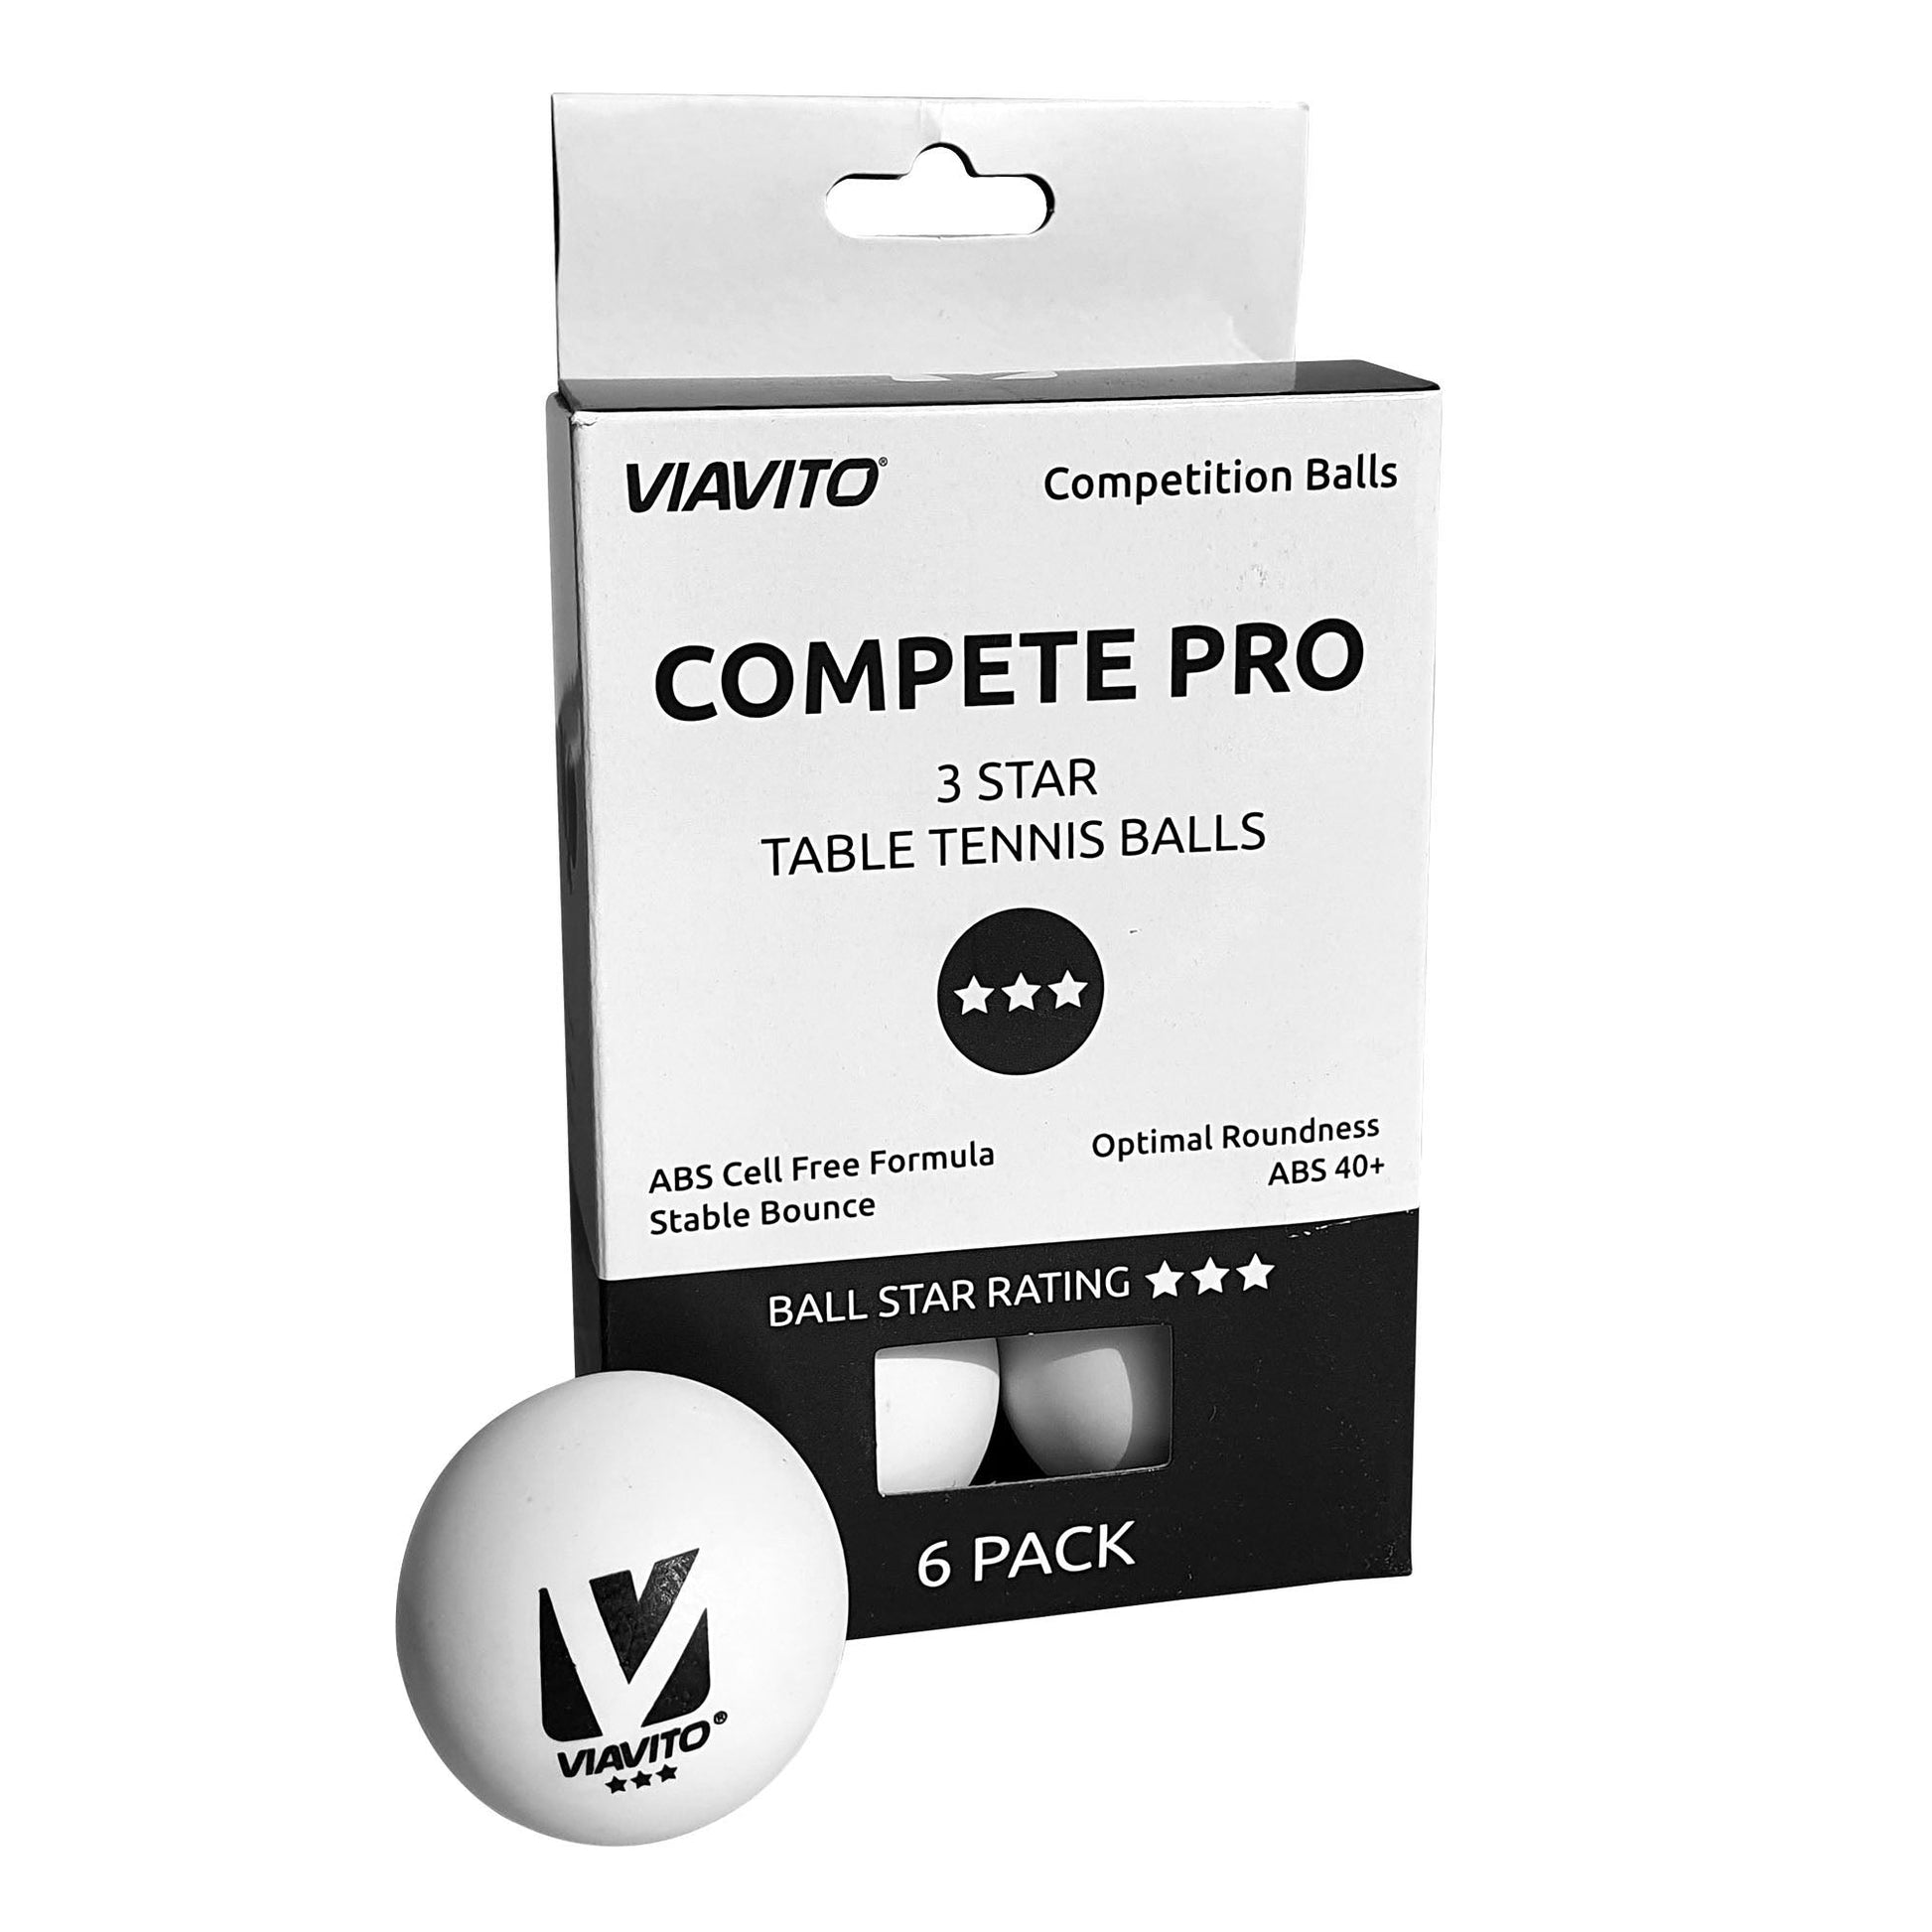 |Viavito Compete Pro 3 Star Table Tennis Balls - Pack of 6 - New - Front|